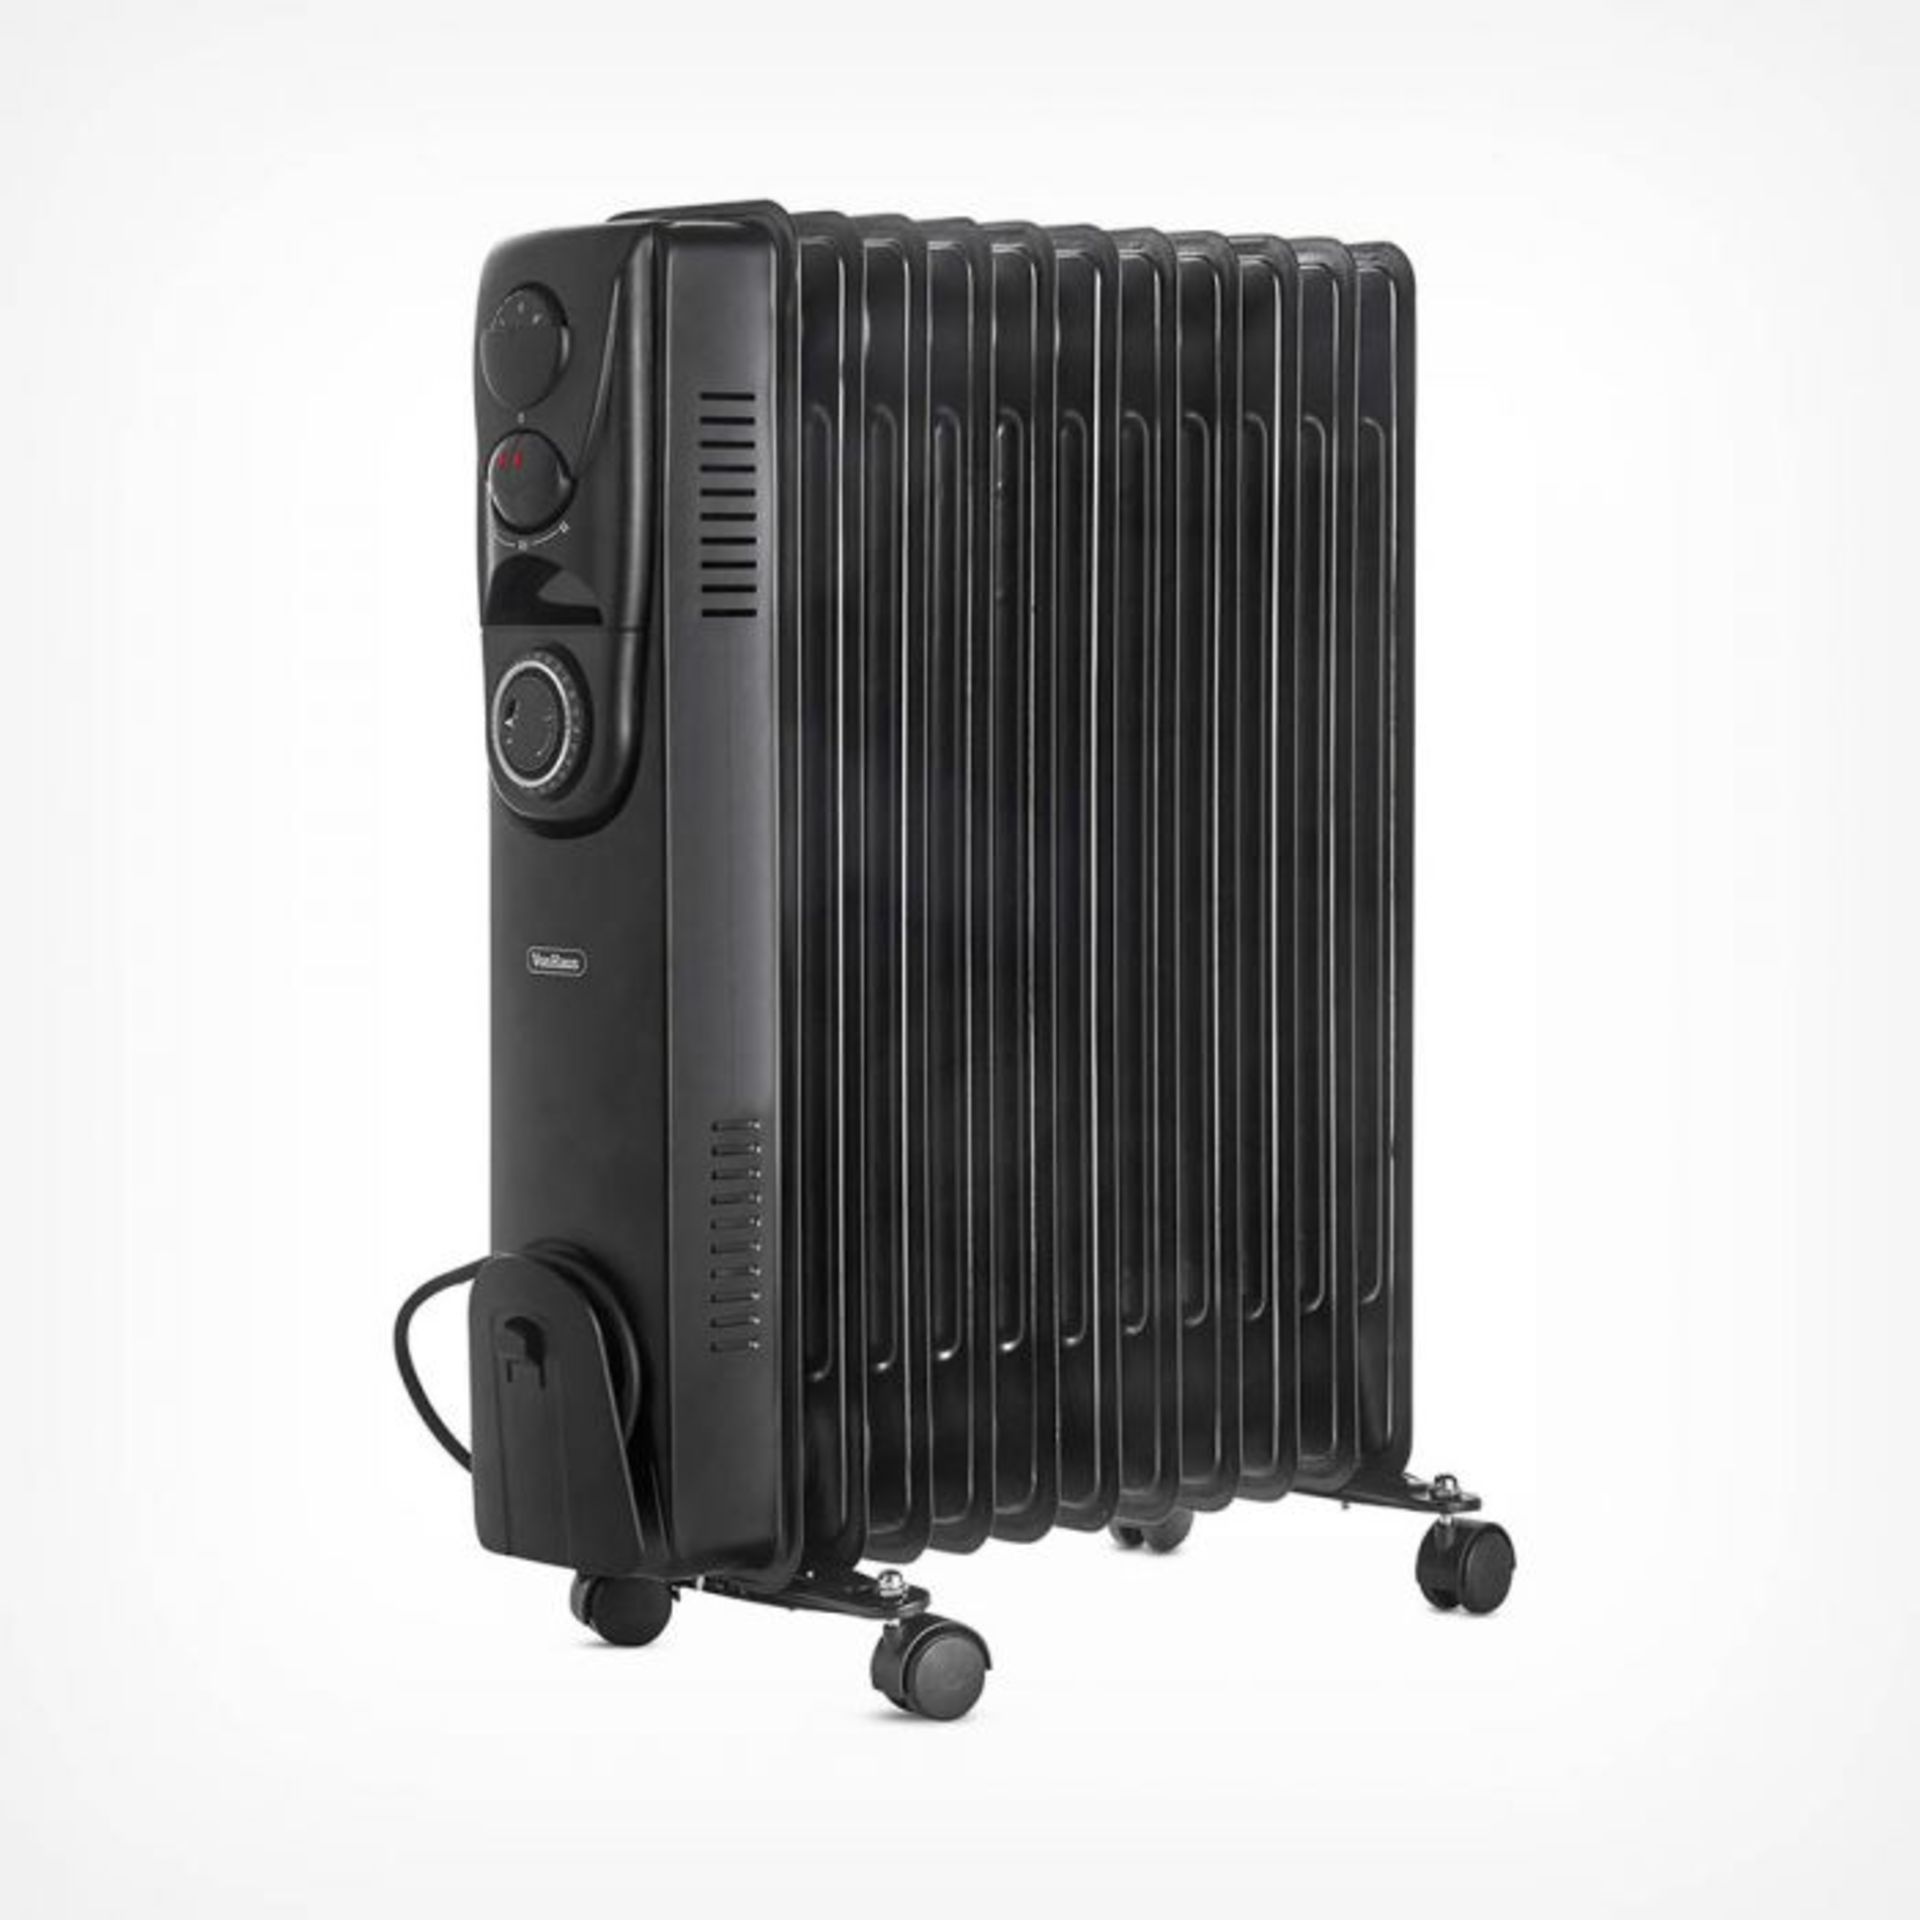 (S36) 11 Fin 2500W Oil Filled Radiator - Black 2500W radiator with 11 oil-filled fins for heat... - Image 3 of 3